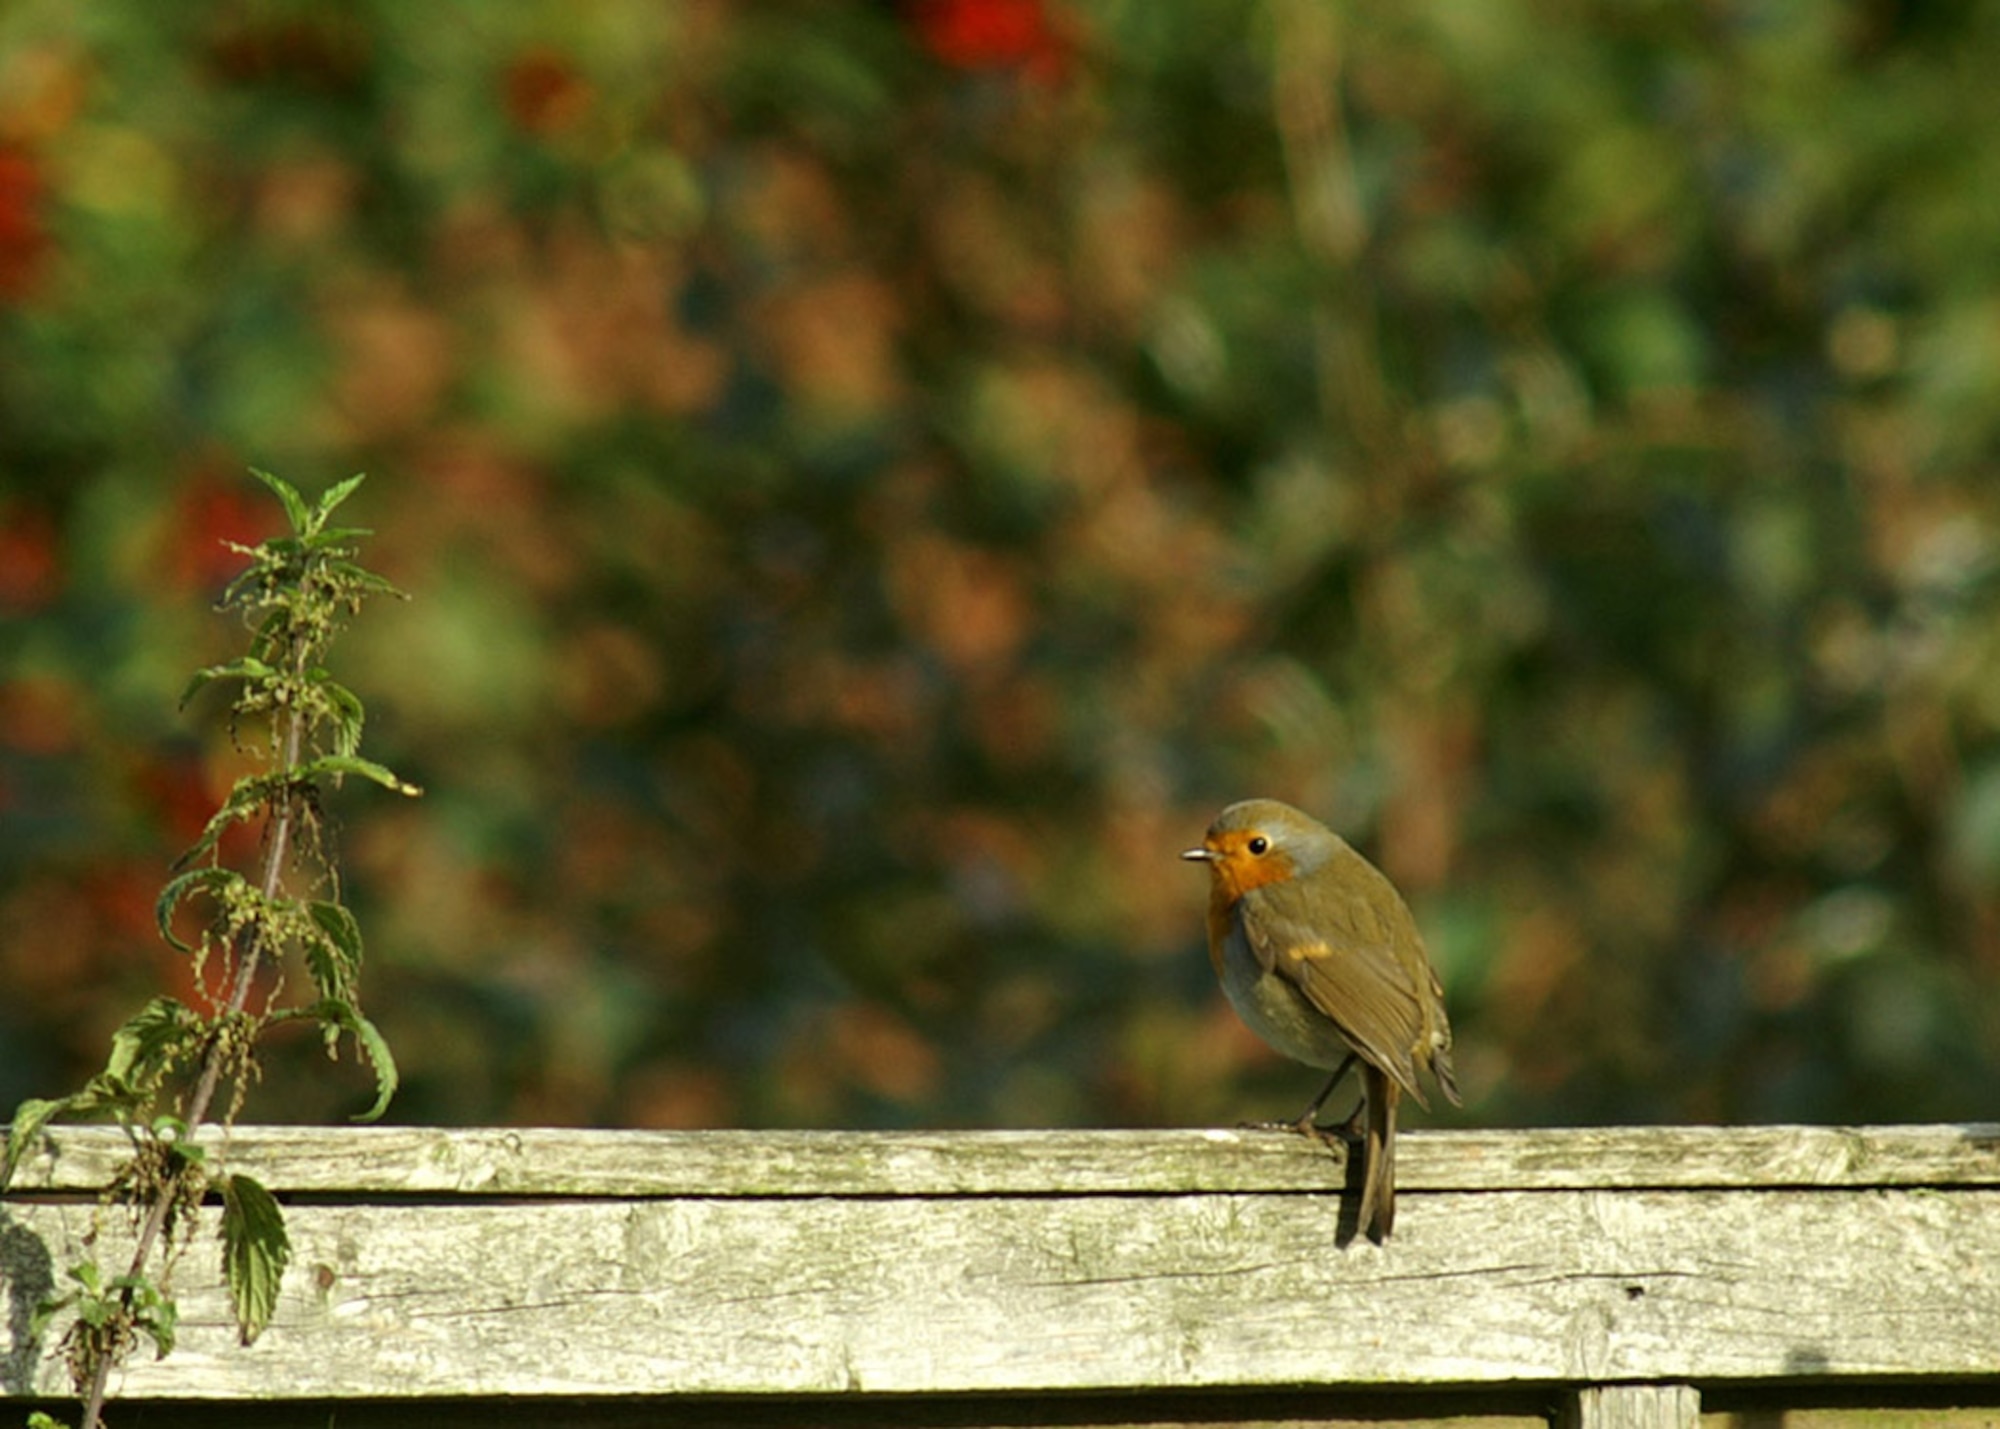 The Robin is a common garden visitor. (U.S. Air Force photo by Judith Wakelam)